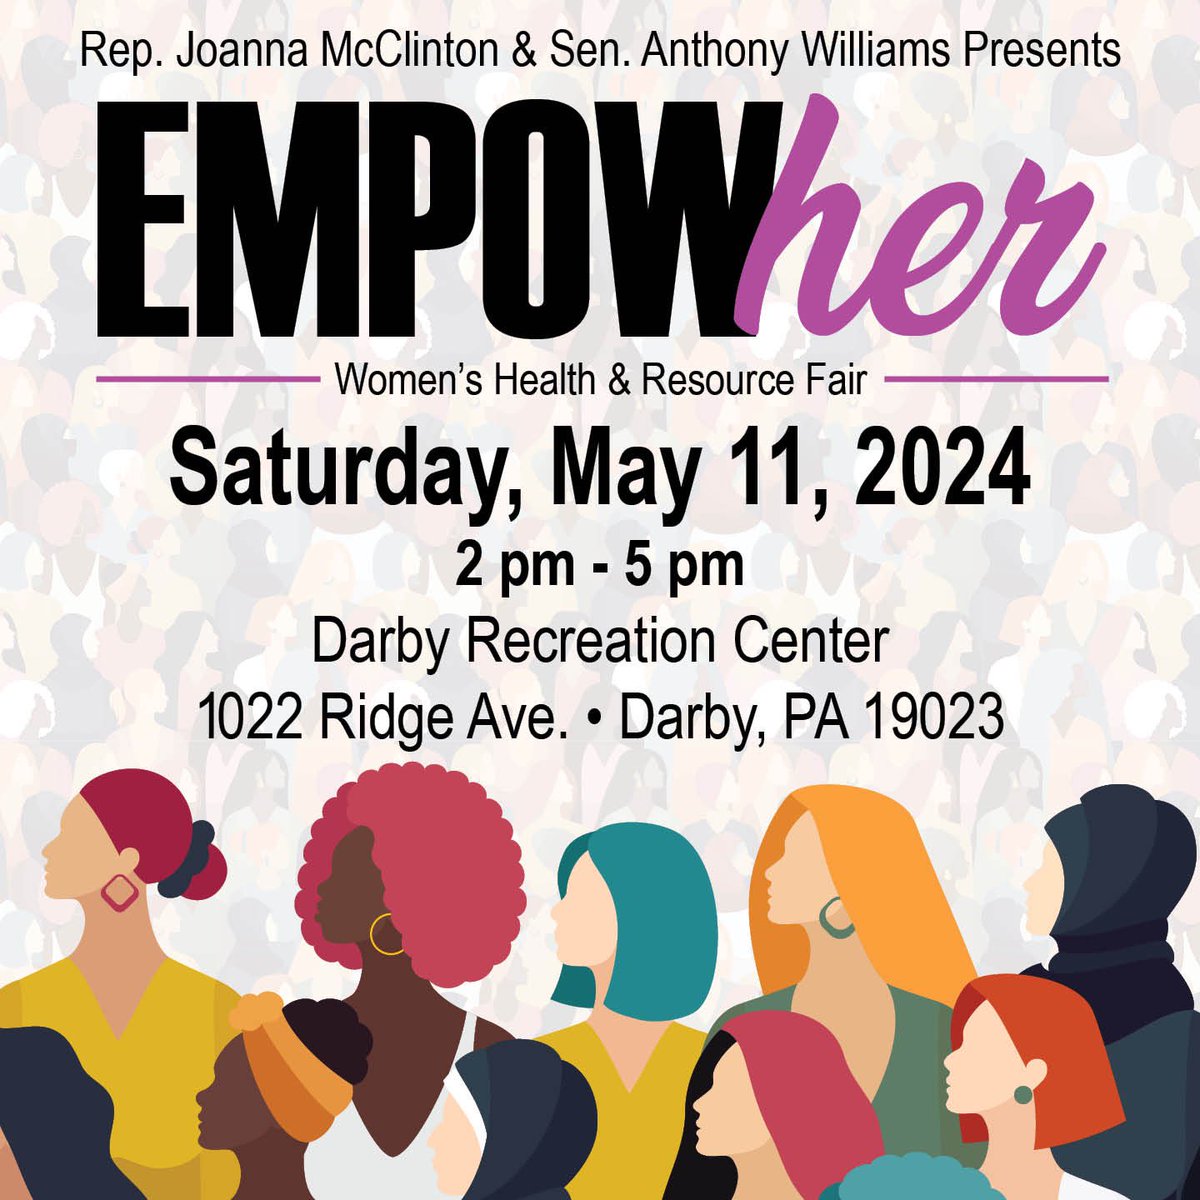 #DelCo neighbors - Join @SenTonyWilliams & I TOMORROW, May 11, 2024, from 2 p.m. to 5 p.m. at the Darby Recreation Center, 1022 Ridge Ave., Darby, PA for the EmpowHER Women's Health and Resource Fair. RSVP by contacting my office at 215-748-6712 or forms.office.com/pages/response…